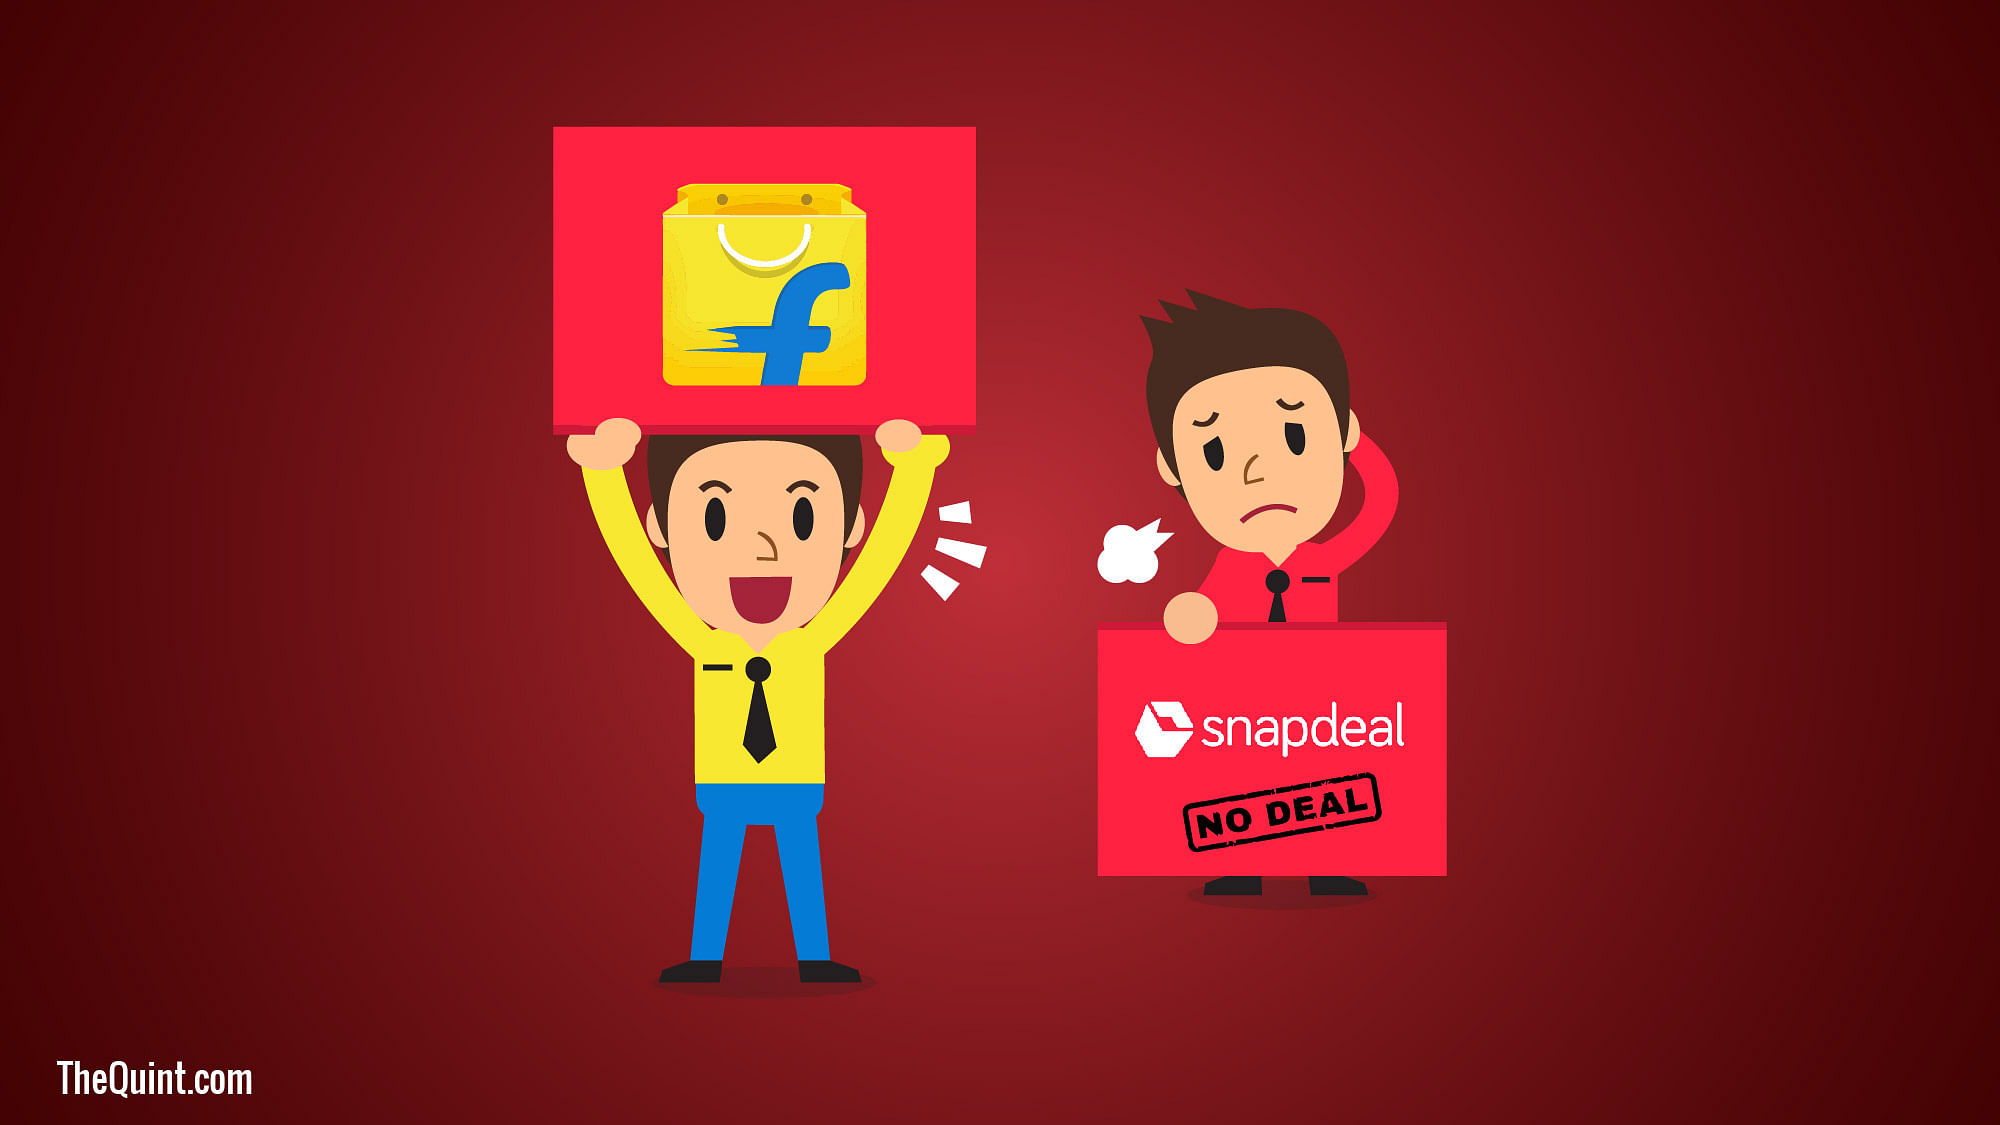 The Flipkart-Snapdeal discussion has come to a standstill now.&nbsp;